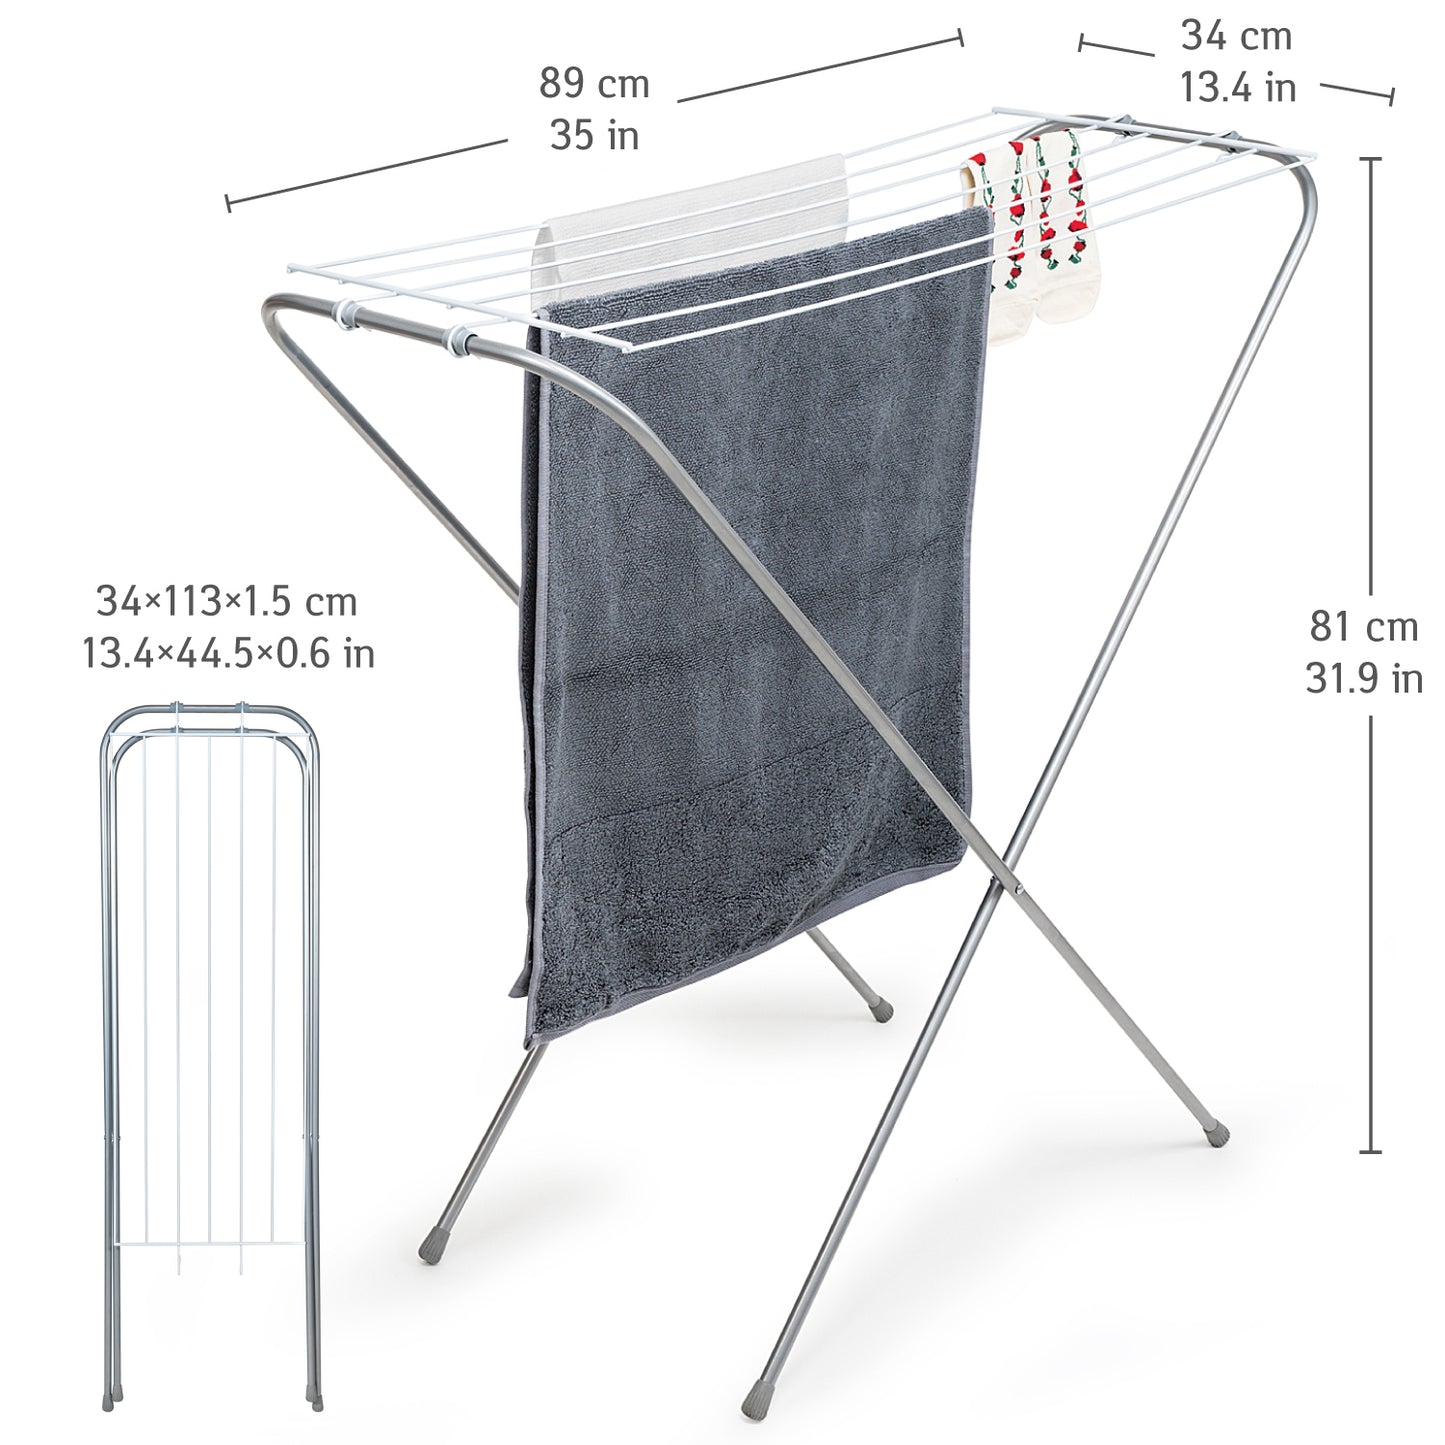 Tatkraft Toro - Foldable Freestanding Clothes Drying Rack, Compact Storage, Space Saving, Made in Italy